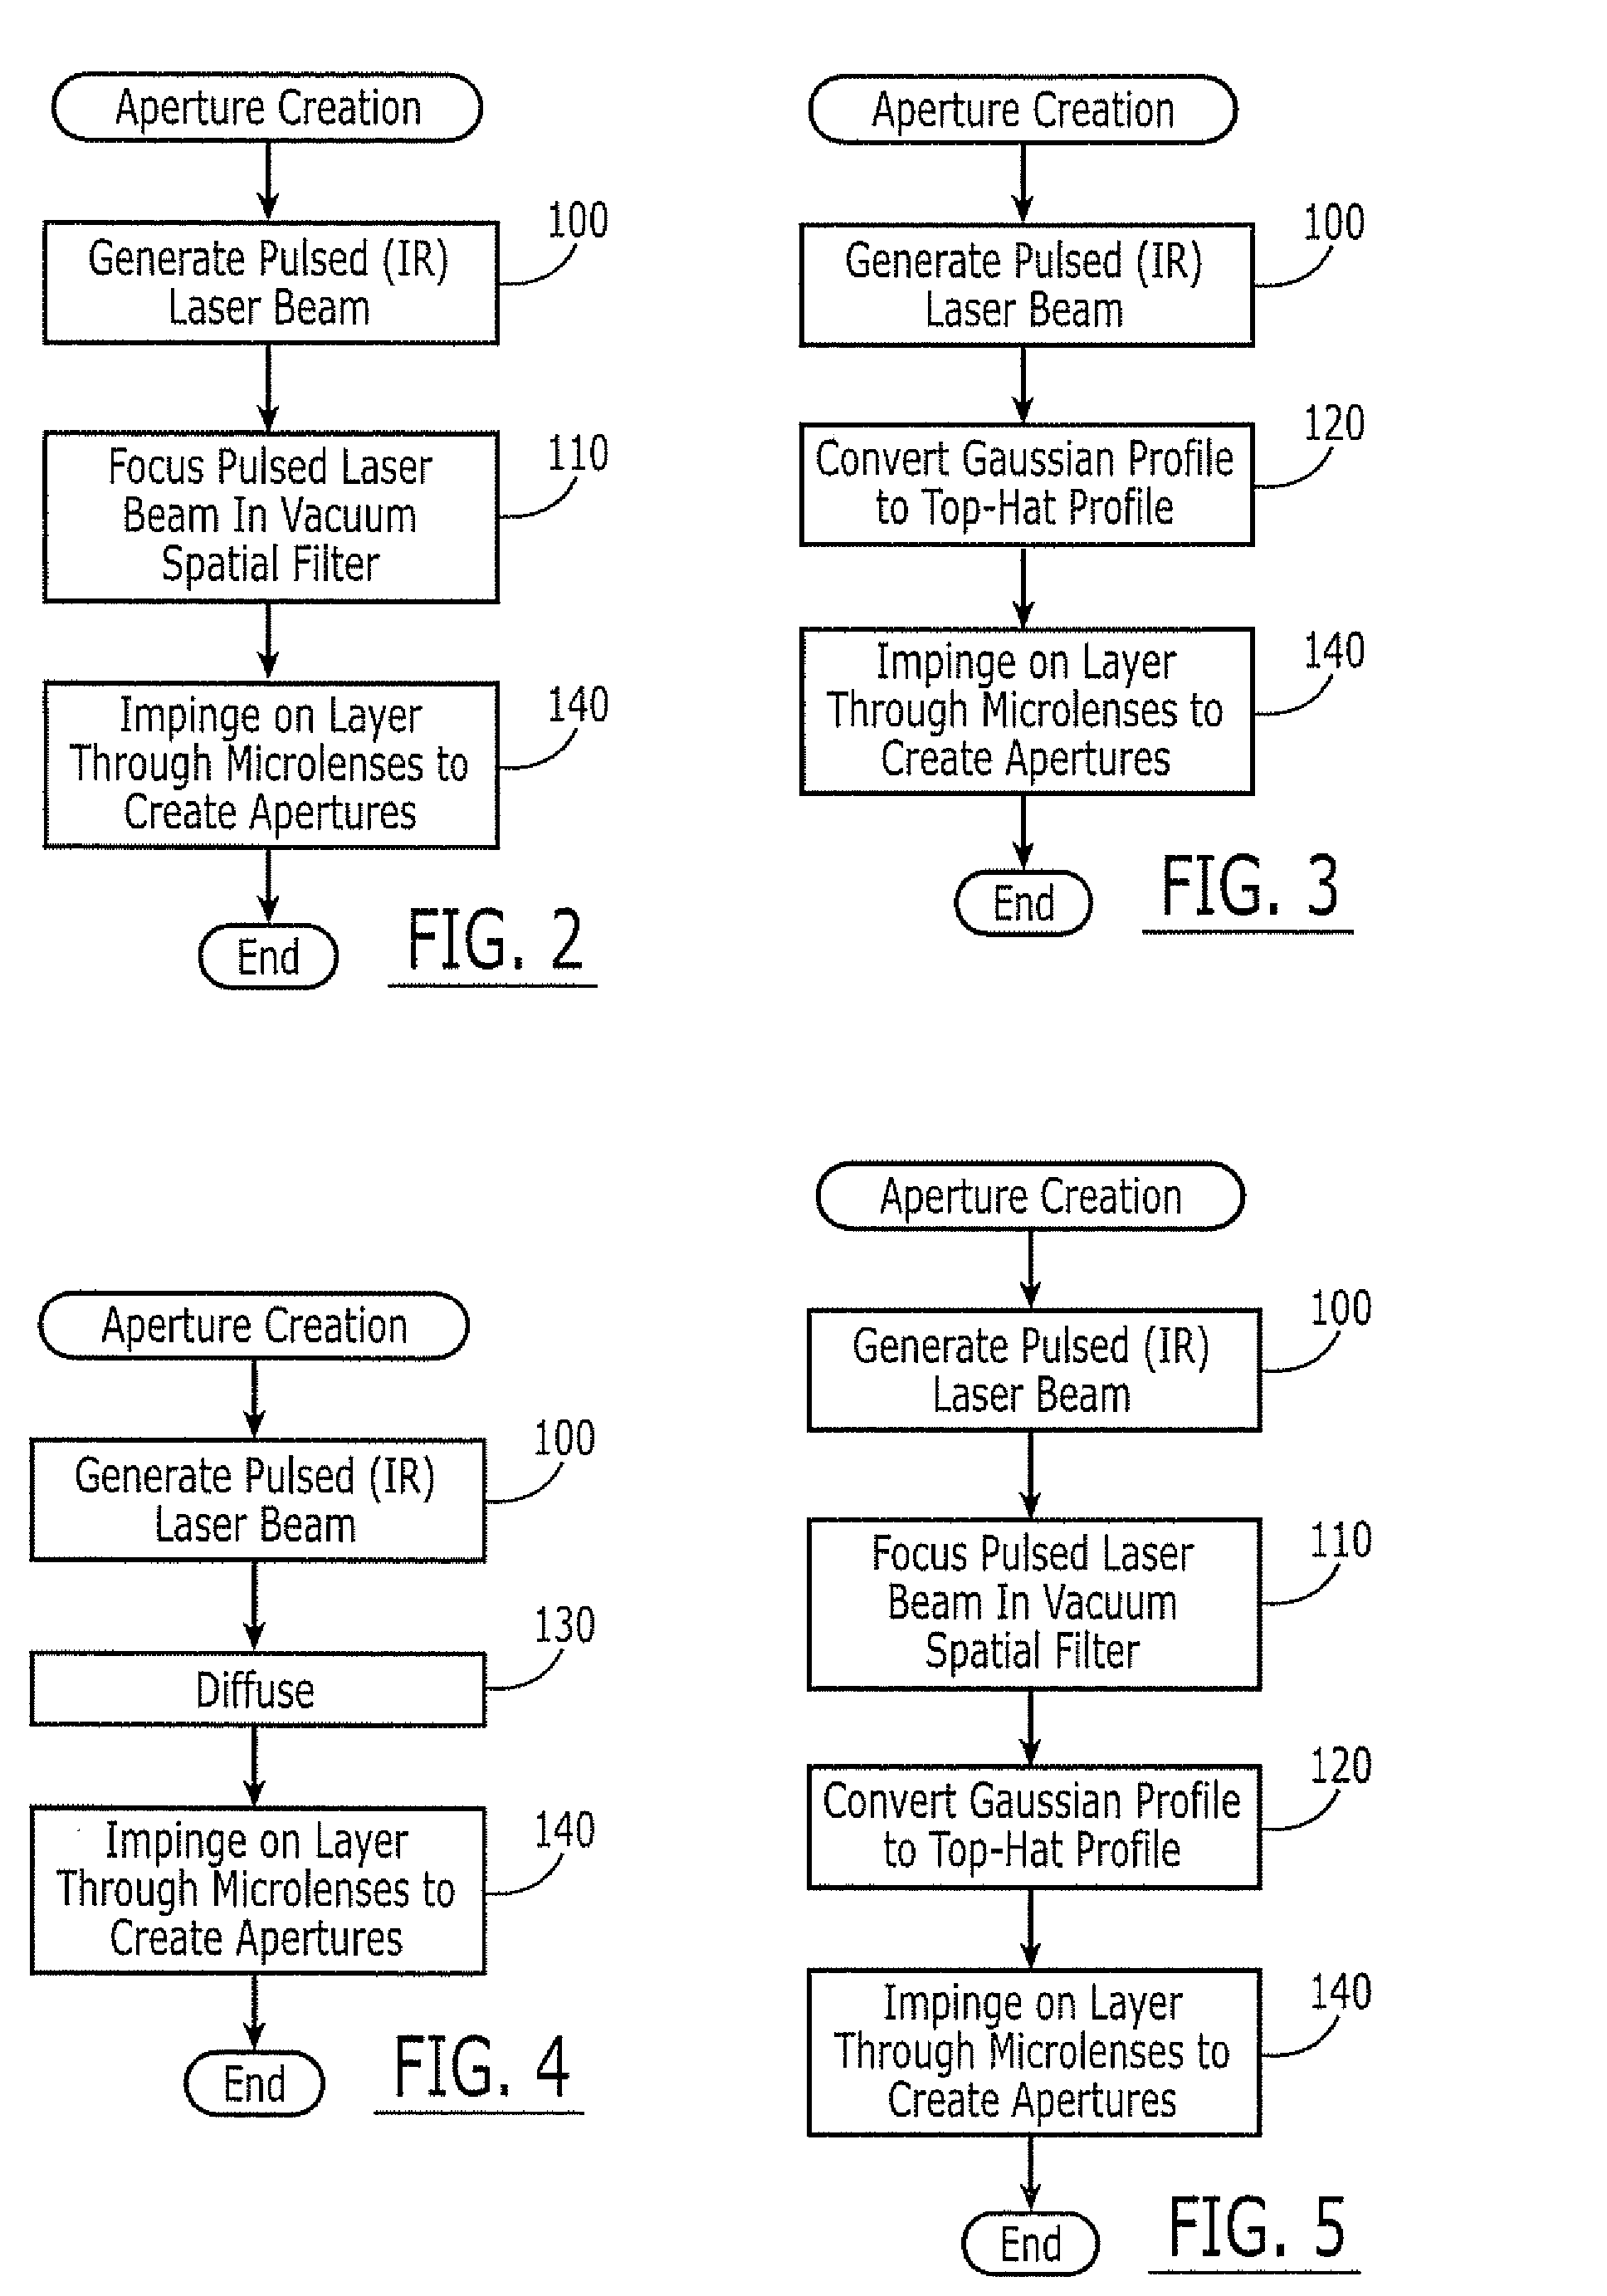 Methods and Apparatus for Processing a Pulsed Laser Beam to Create Apertures Through Microlens Arrays, and Products Produced Thereby